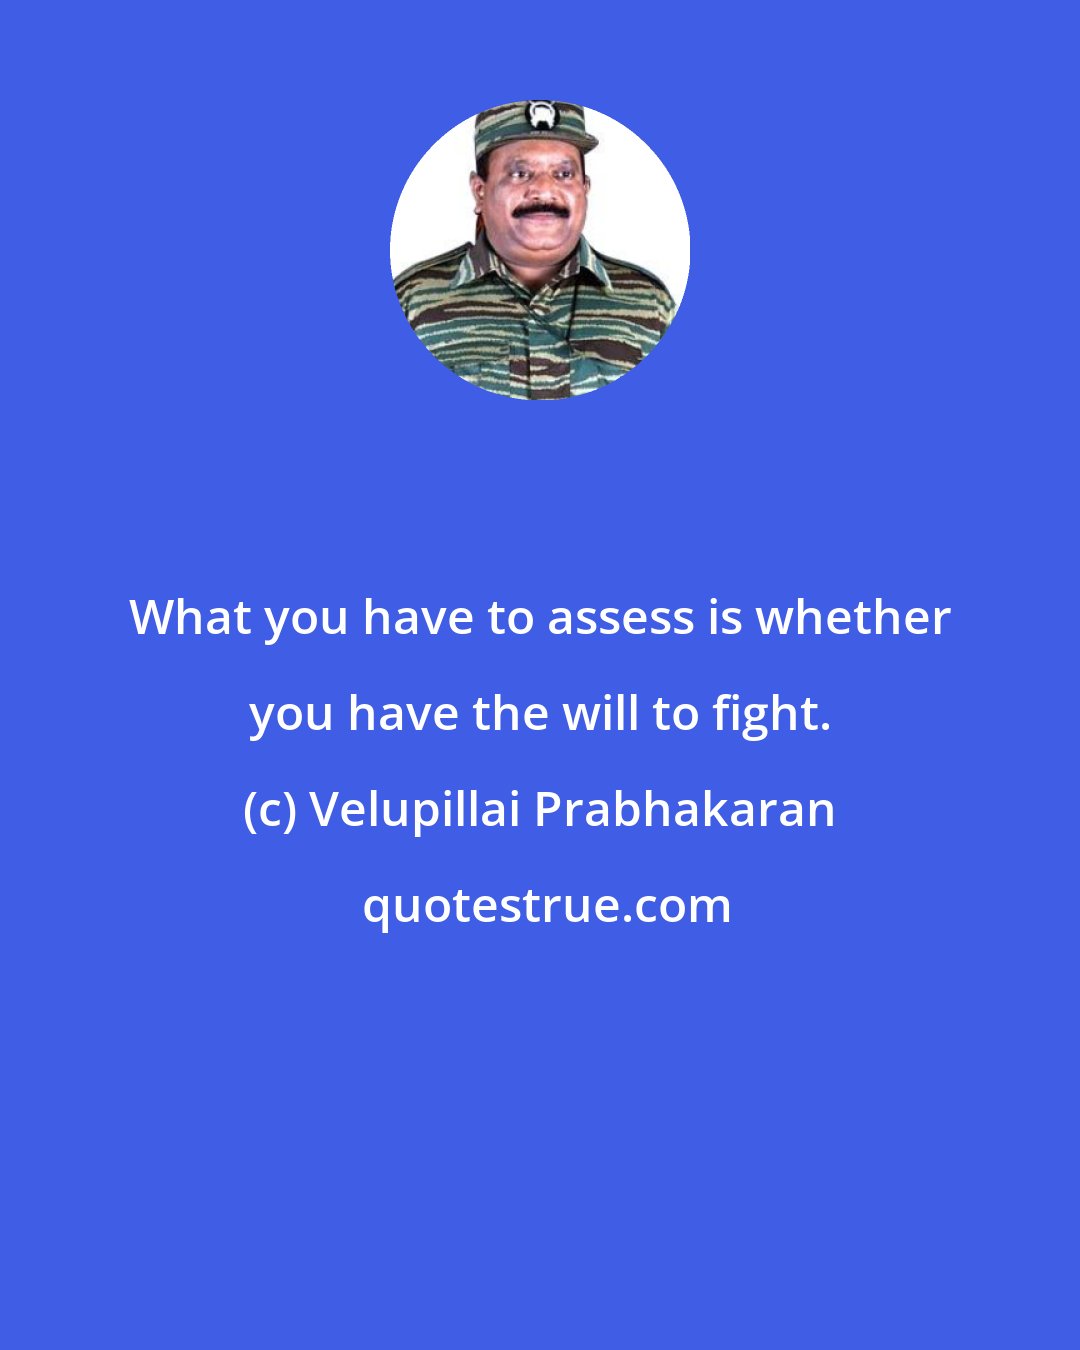 Velupillai Prabhakaran: What you have to assess is whether you have the will to fight.